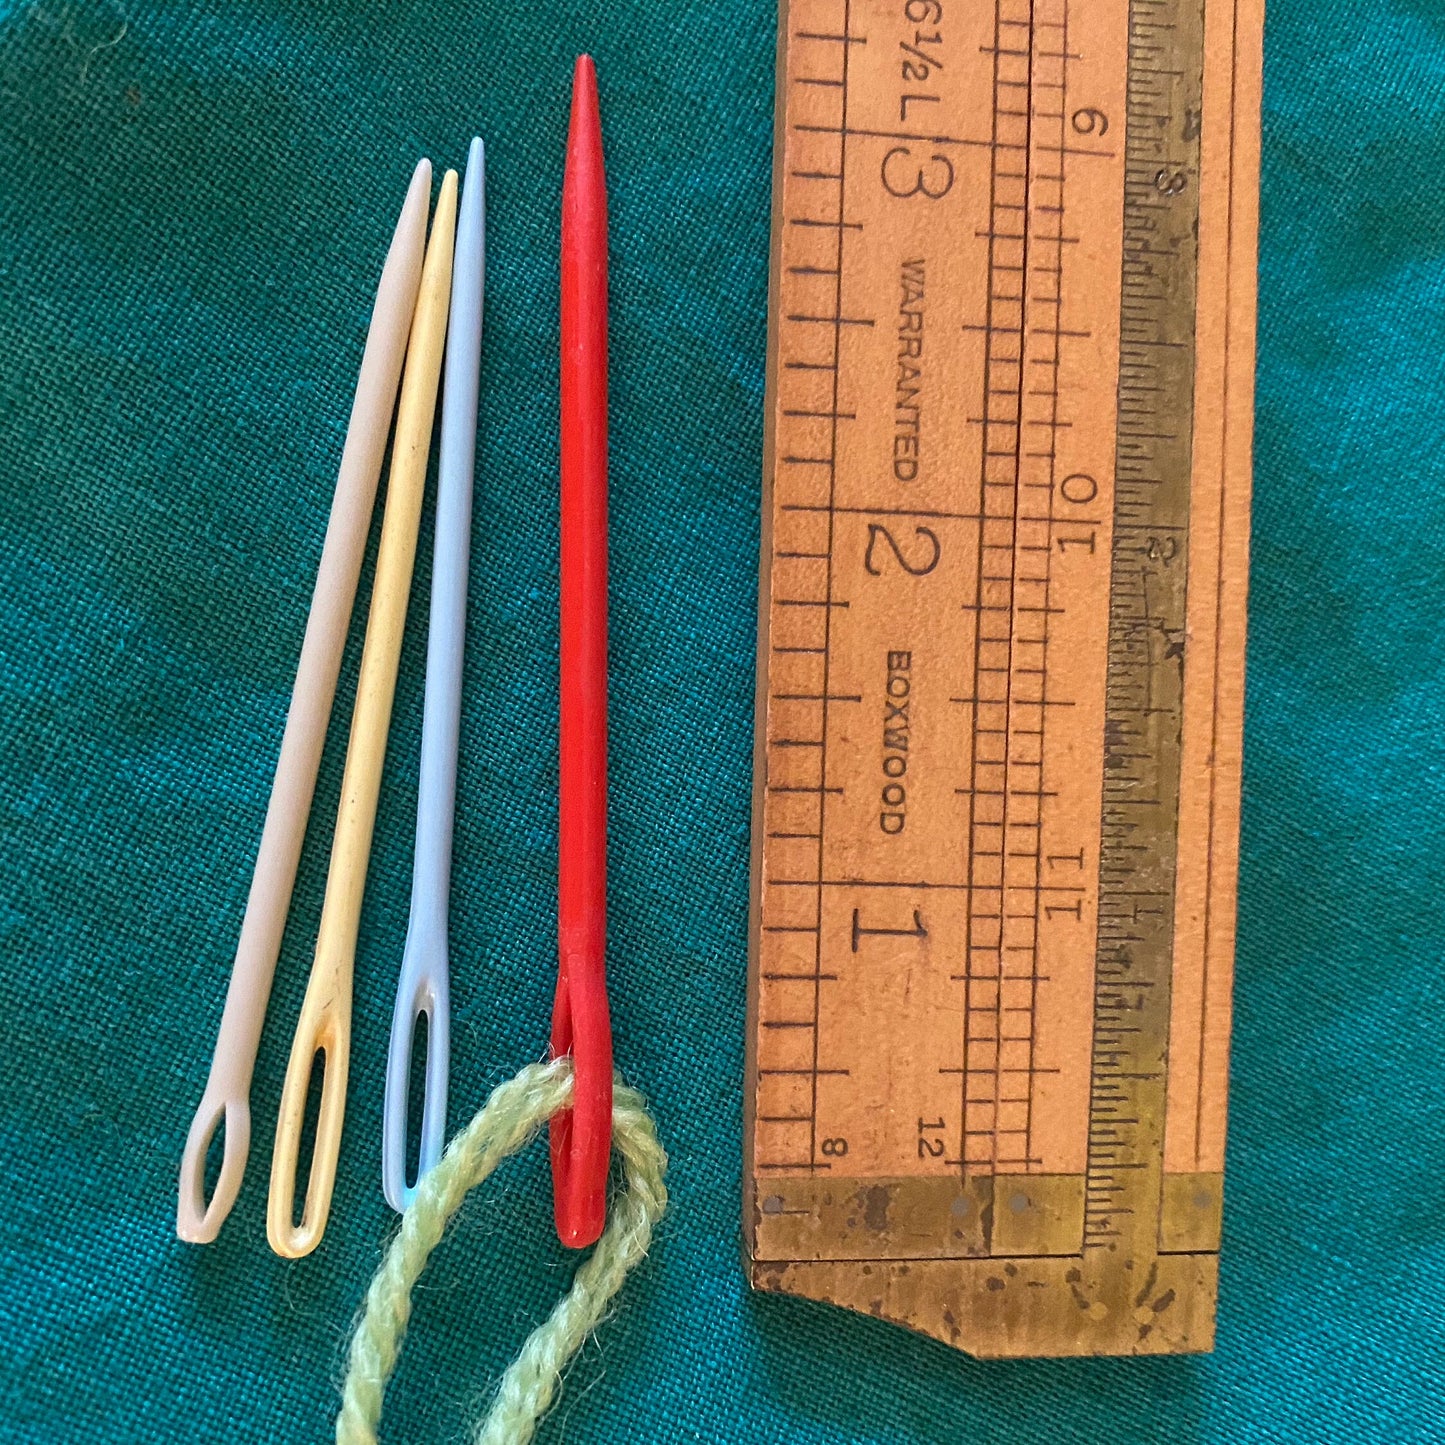 Kid-friendly yarn darner: Ethically sourced/secondhand supply blunt tipped sewing needle. Gently used and/or new old stock, metal or plastic